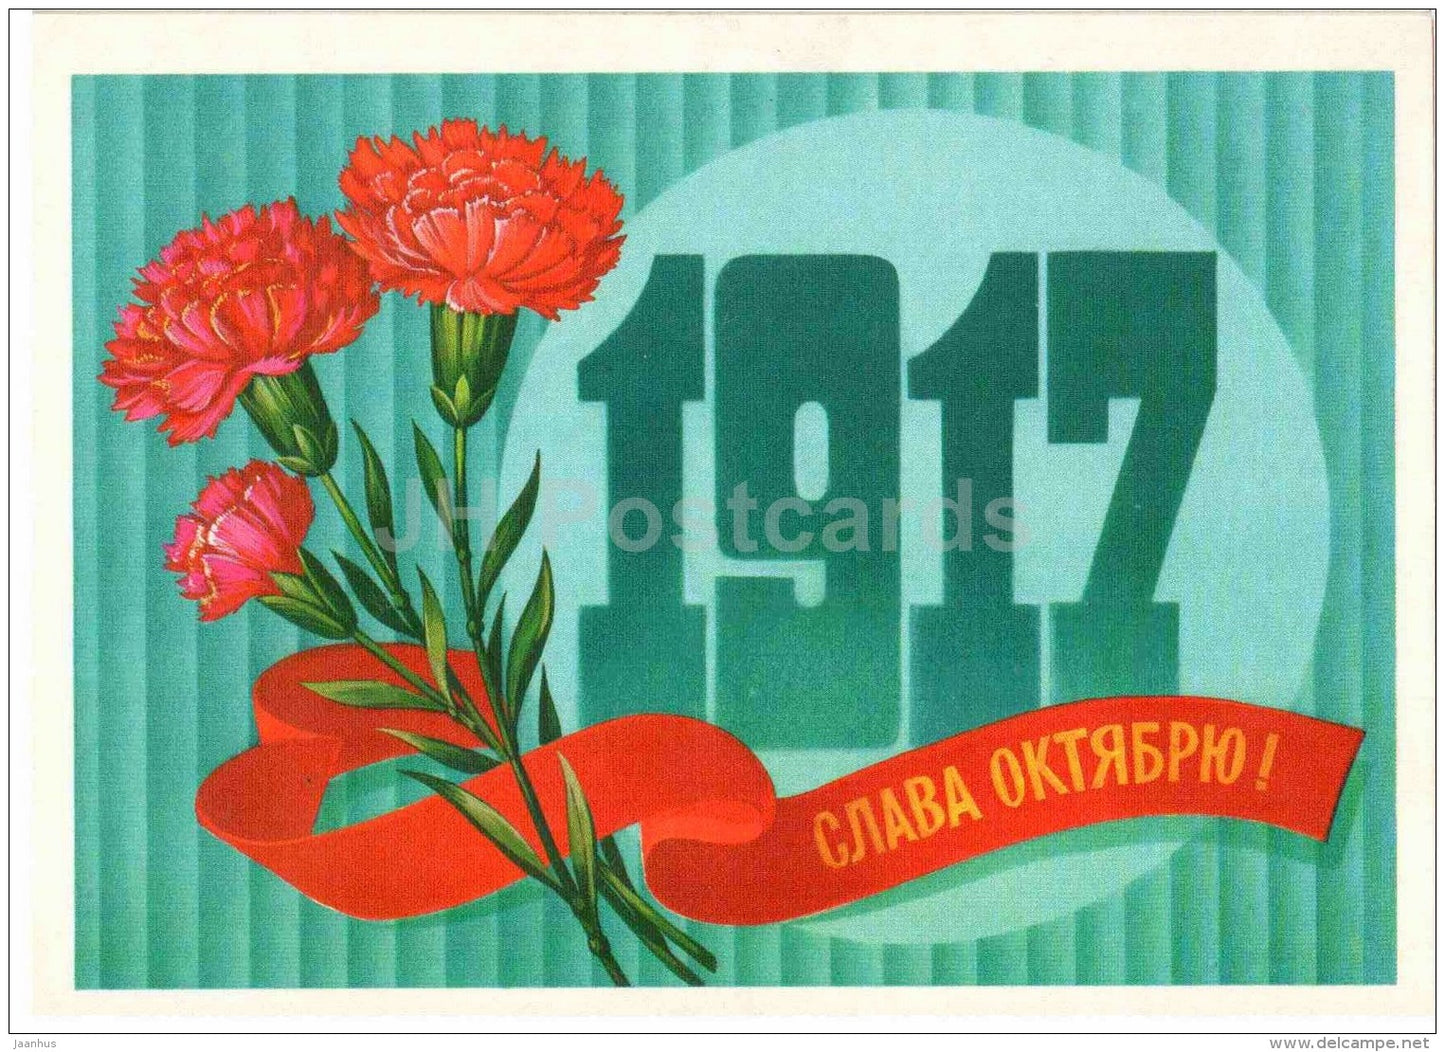 October Revolution anniversary by F. Markov - red carnation - flowers - 1982 - Russia USSR - unused - JH Postcards